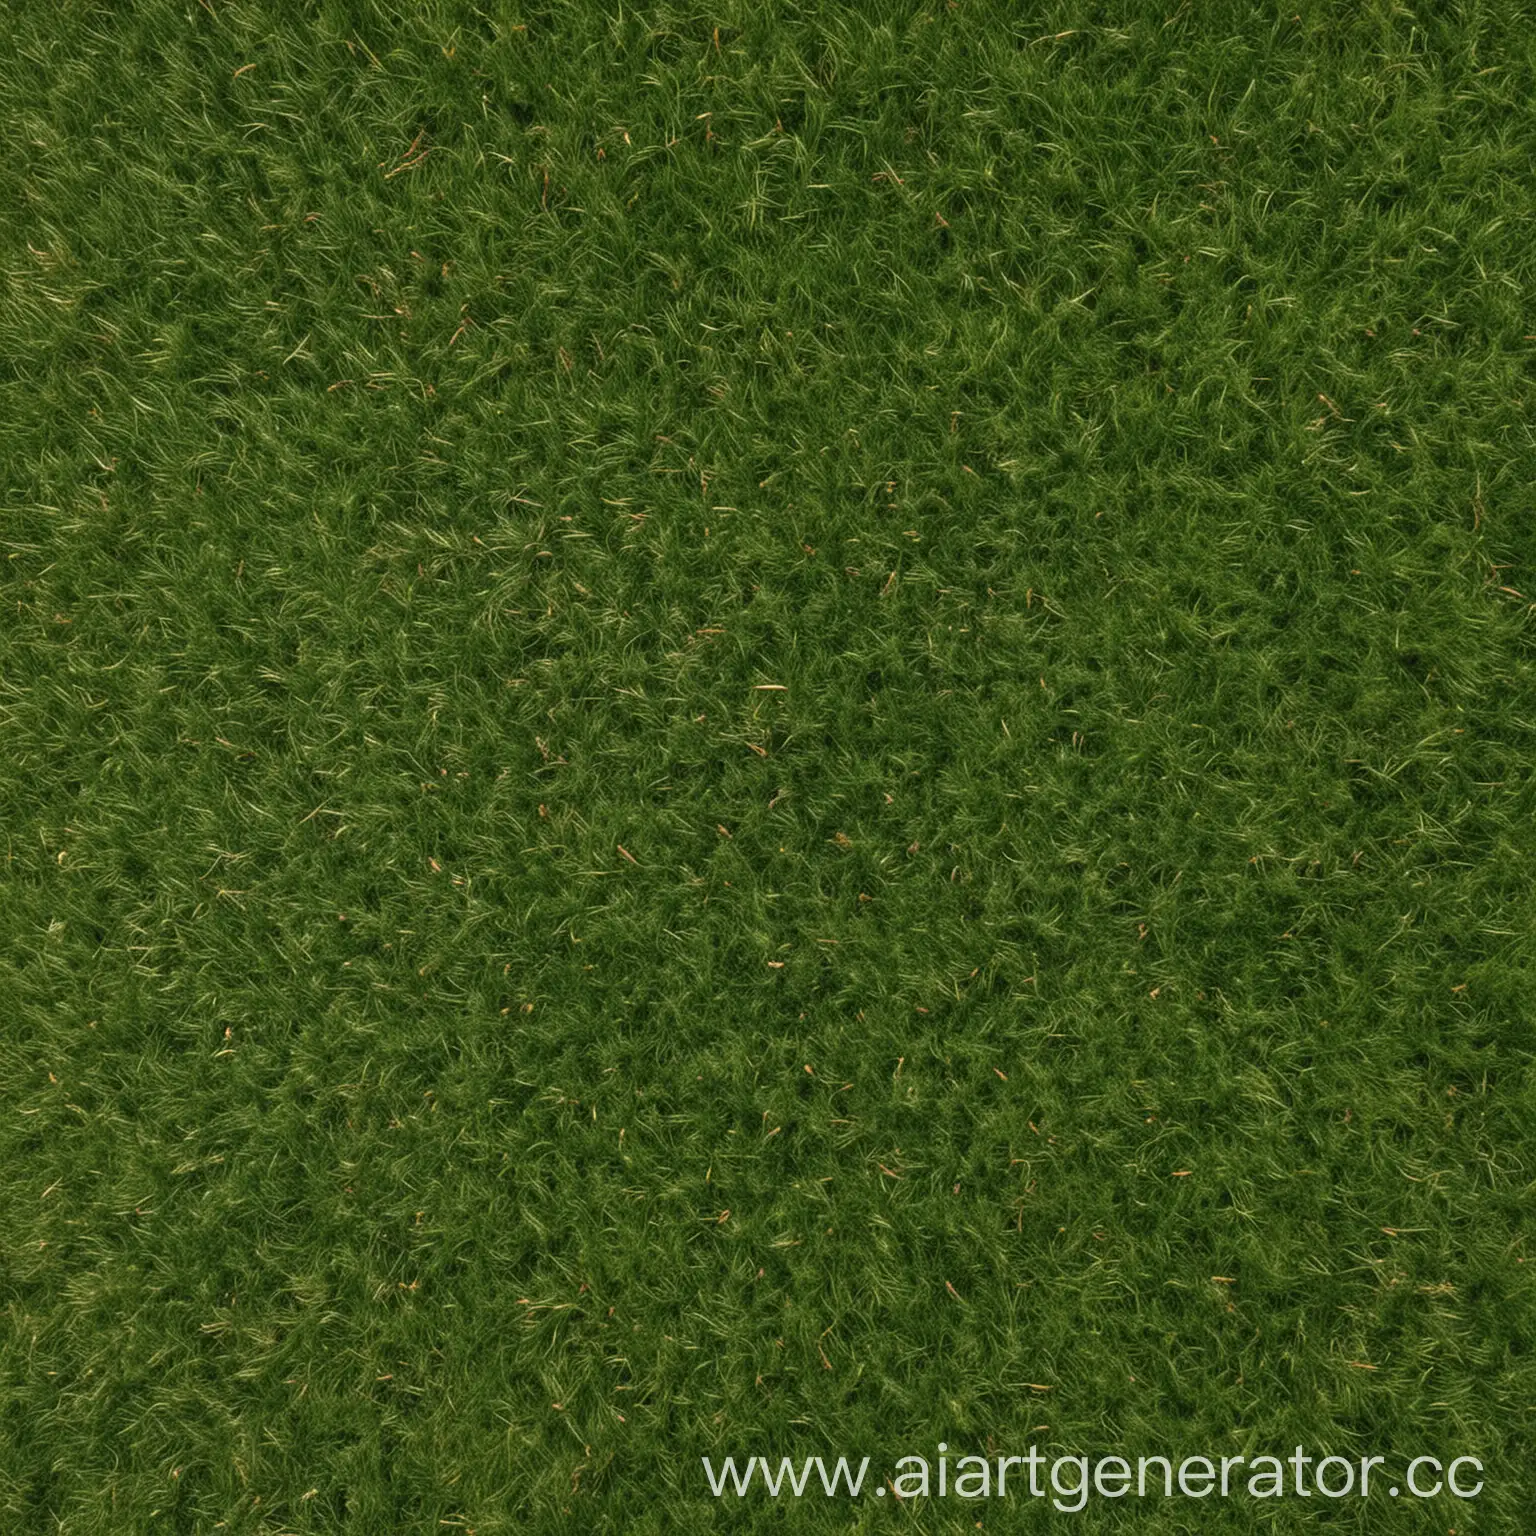 Aerial-View-of-Lush-Grass-Terrain-for-Gaming-Environment